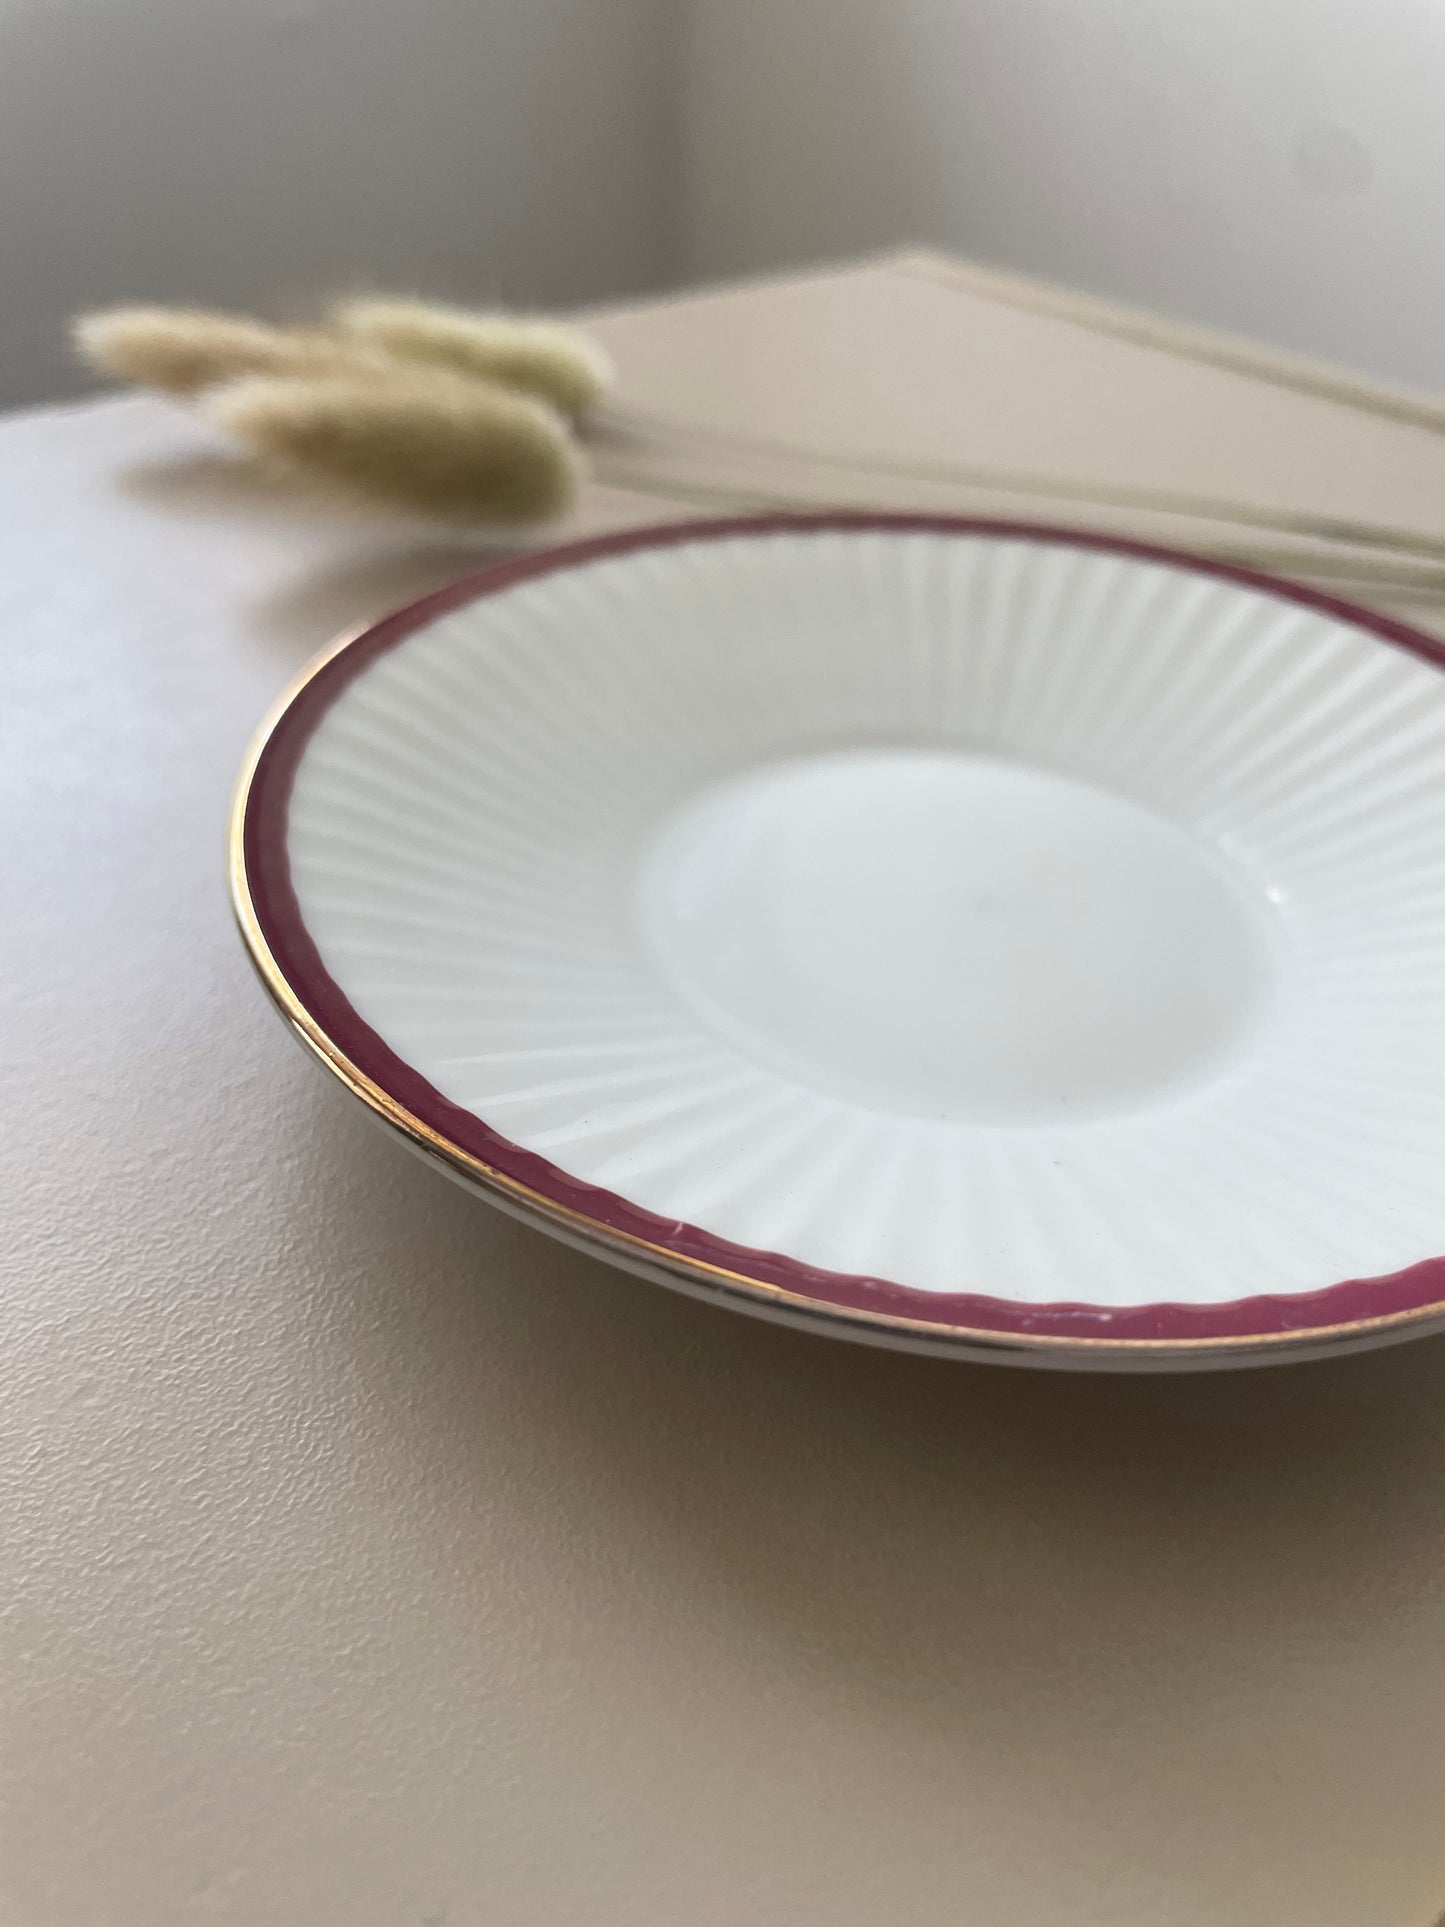 Clean Ribbed Saucer Dish